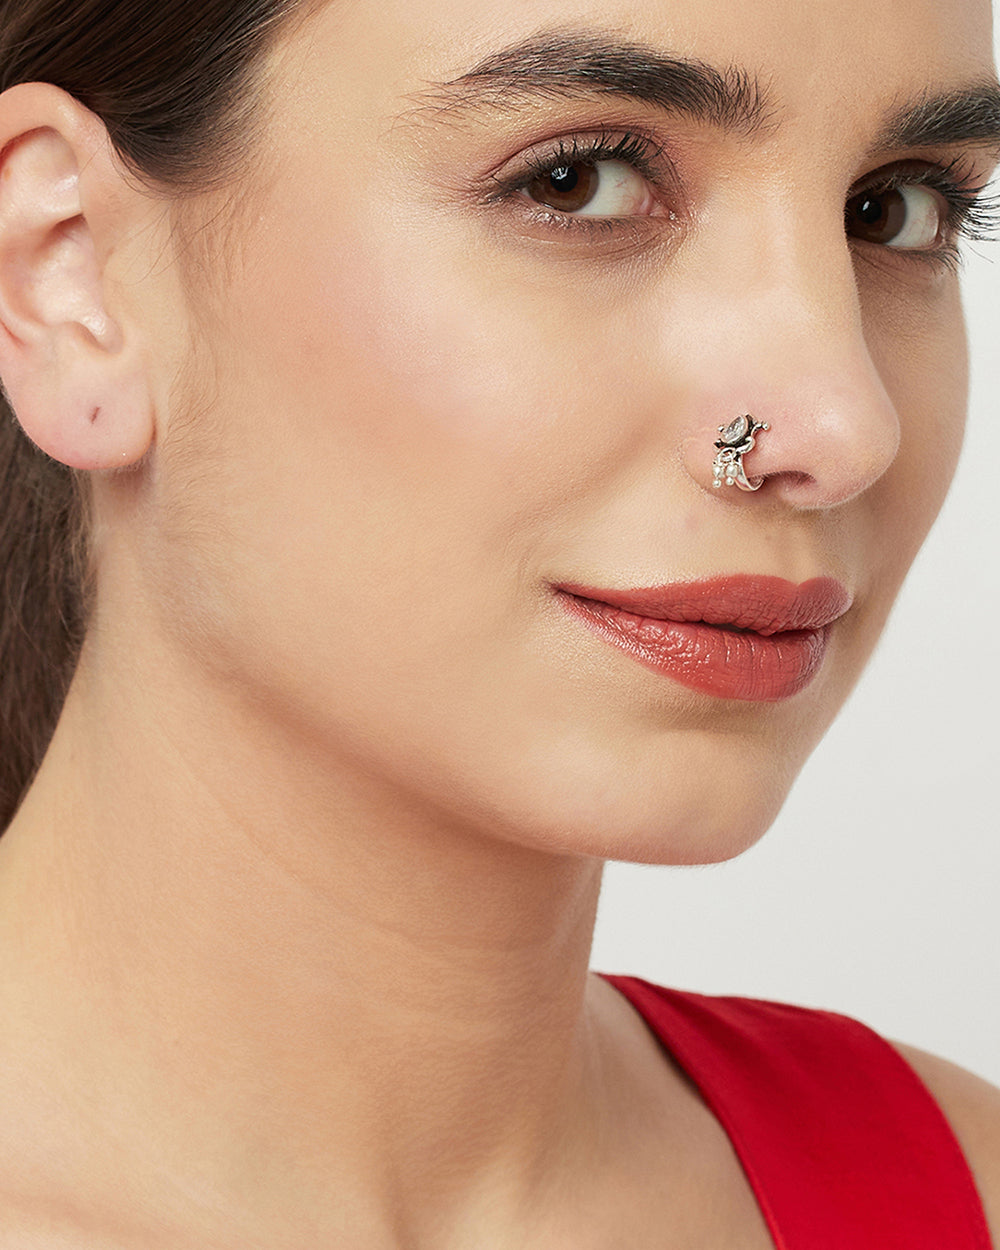 Boho 'Bohemian' Nose Ring - Willow and Stag